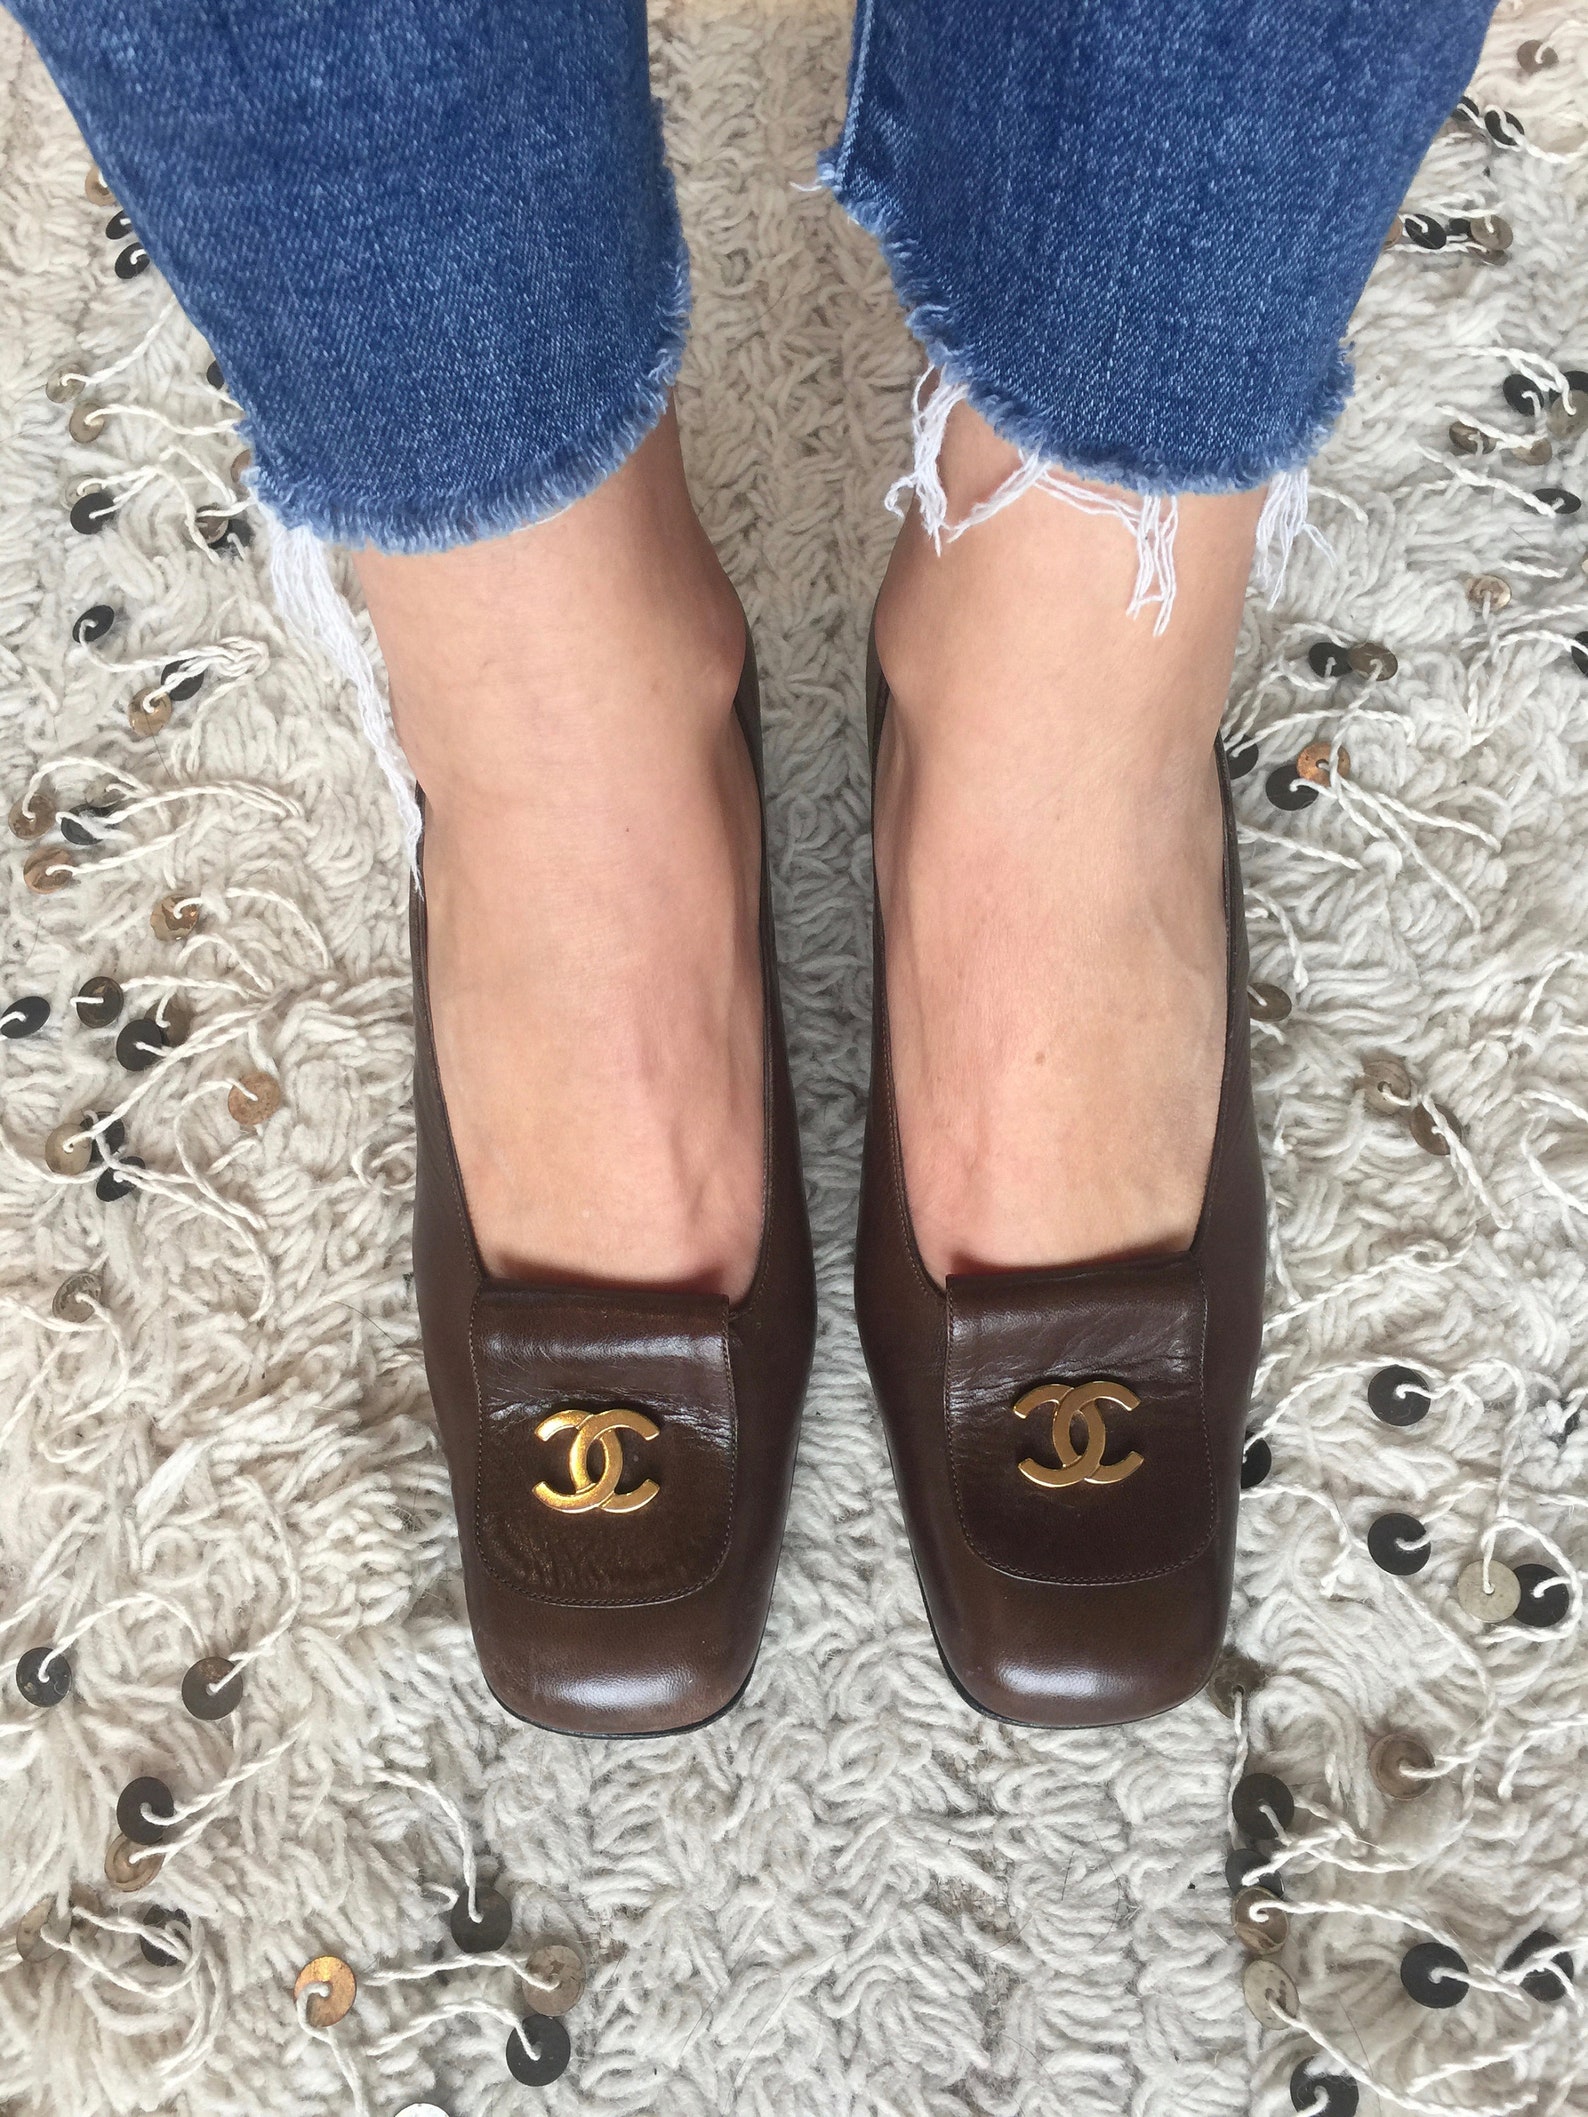 vintage chanel cc metal logo brown leather loafers heels driving shoes smoking slippers ballet flats 37.5 us 7 - 7.5